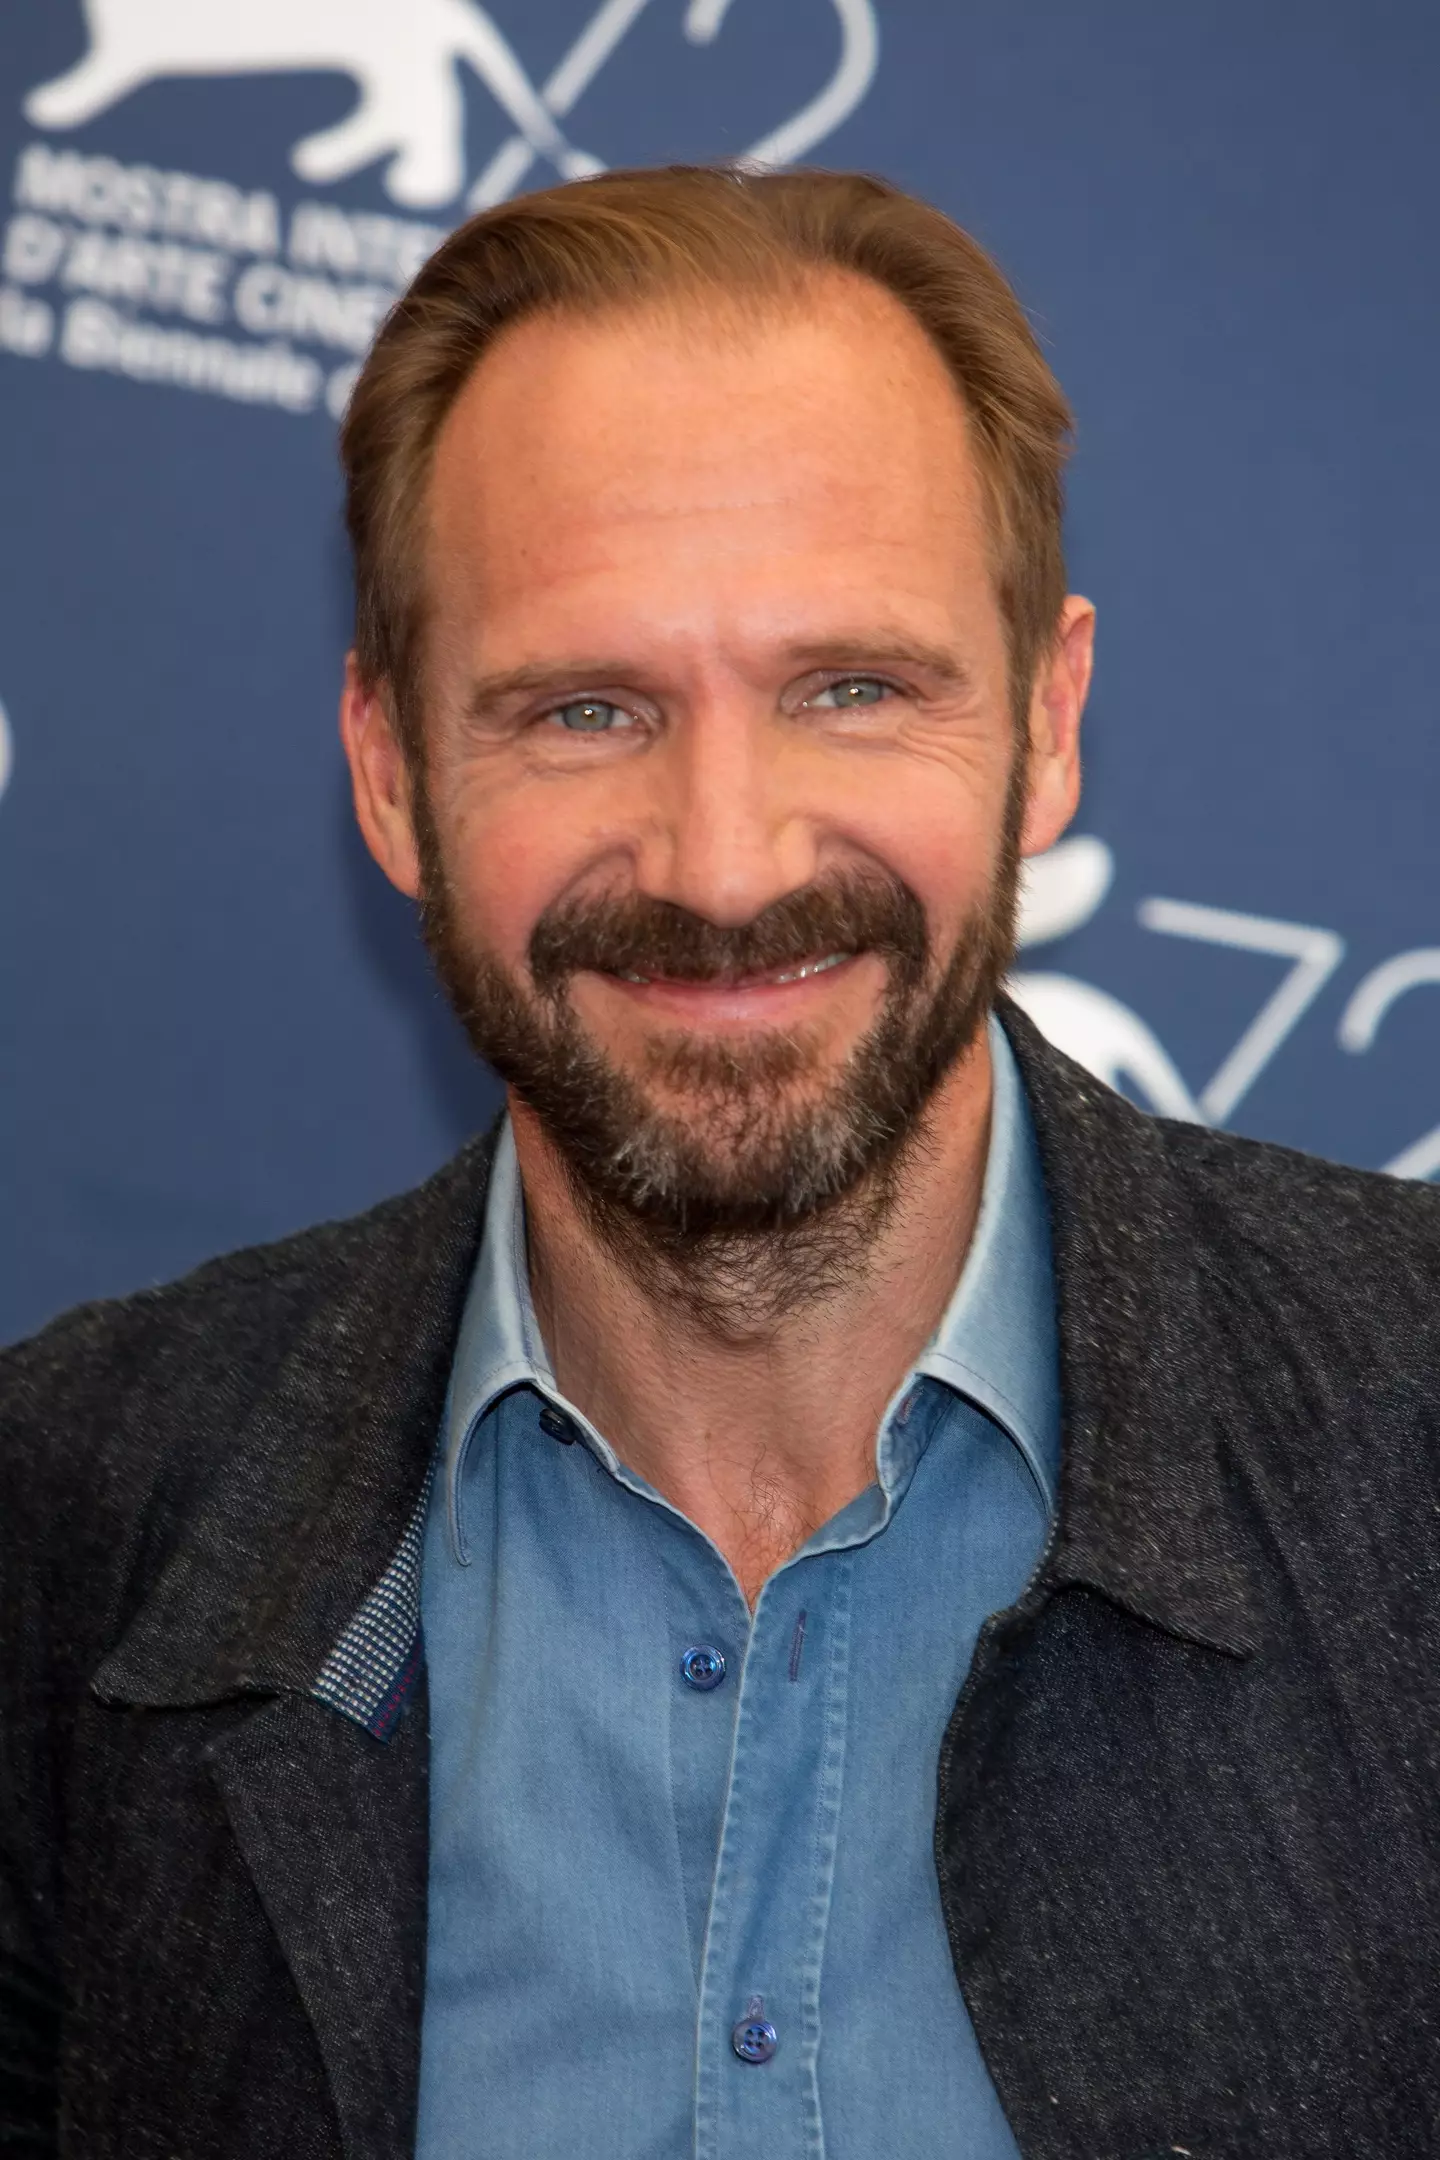 Ralph Fiennes said the pronunciation of his first name has caused problems.